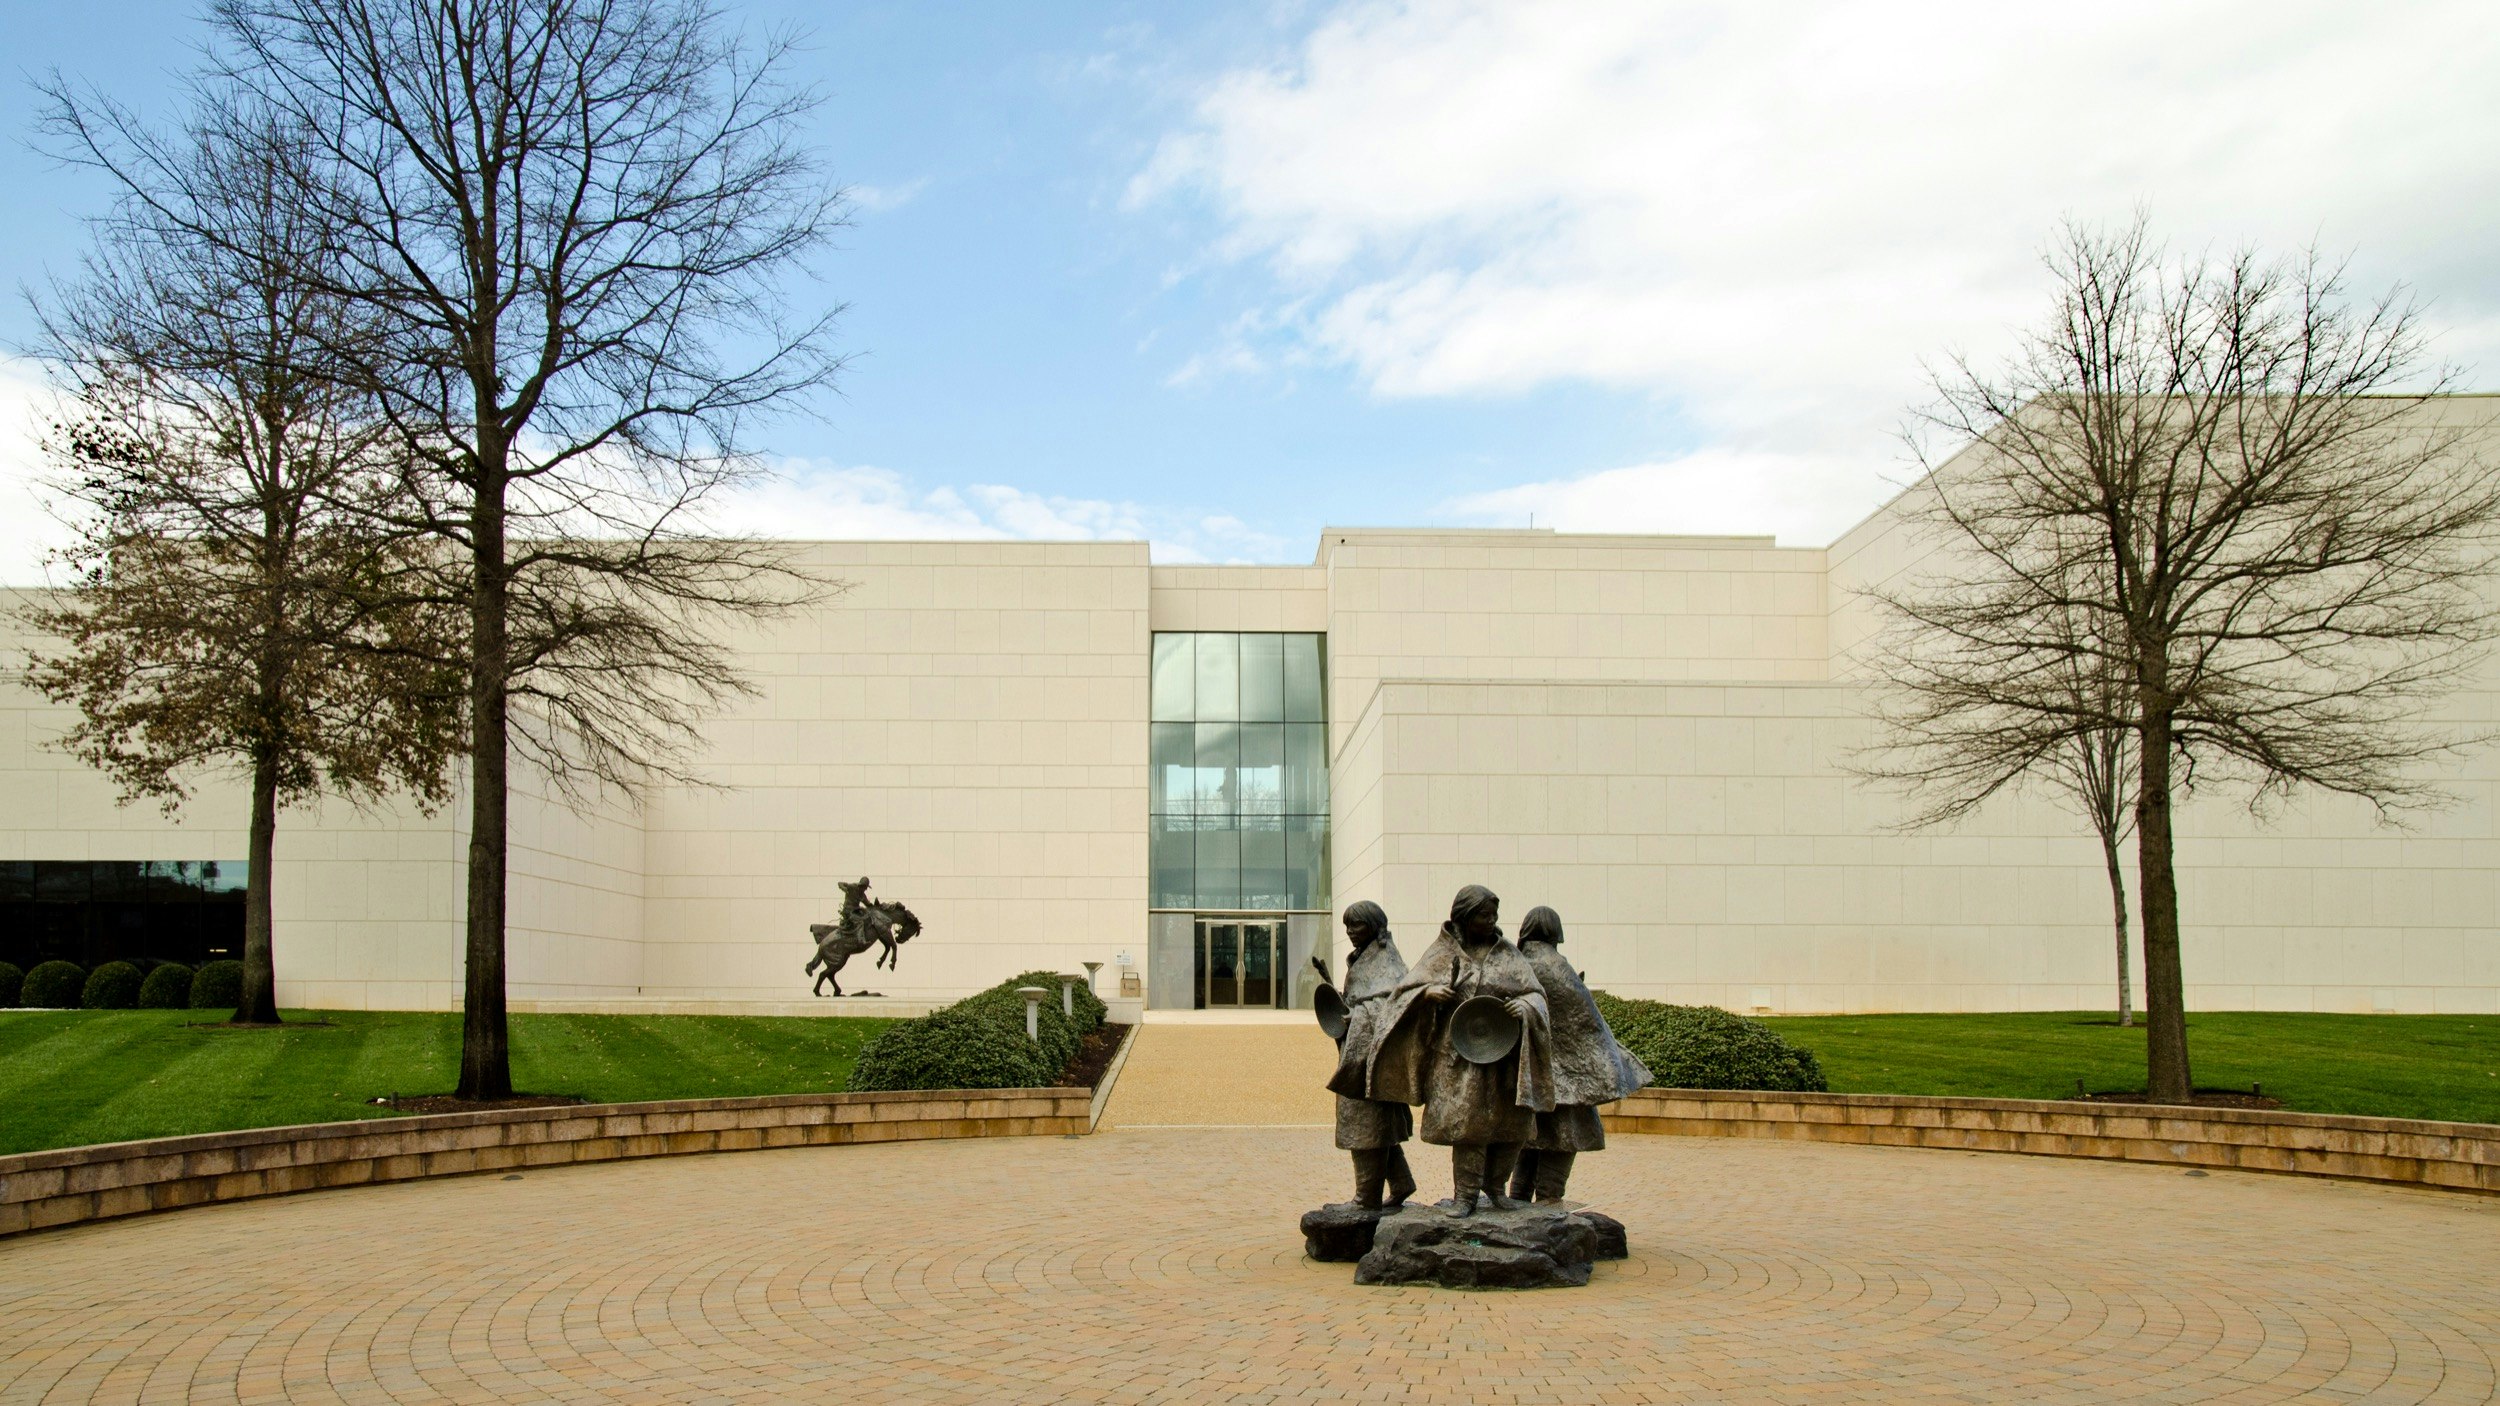 Statues of Native Americans and a bronco rider adorn the grounds of the Booth Western Art Museum